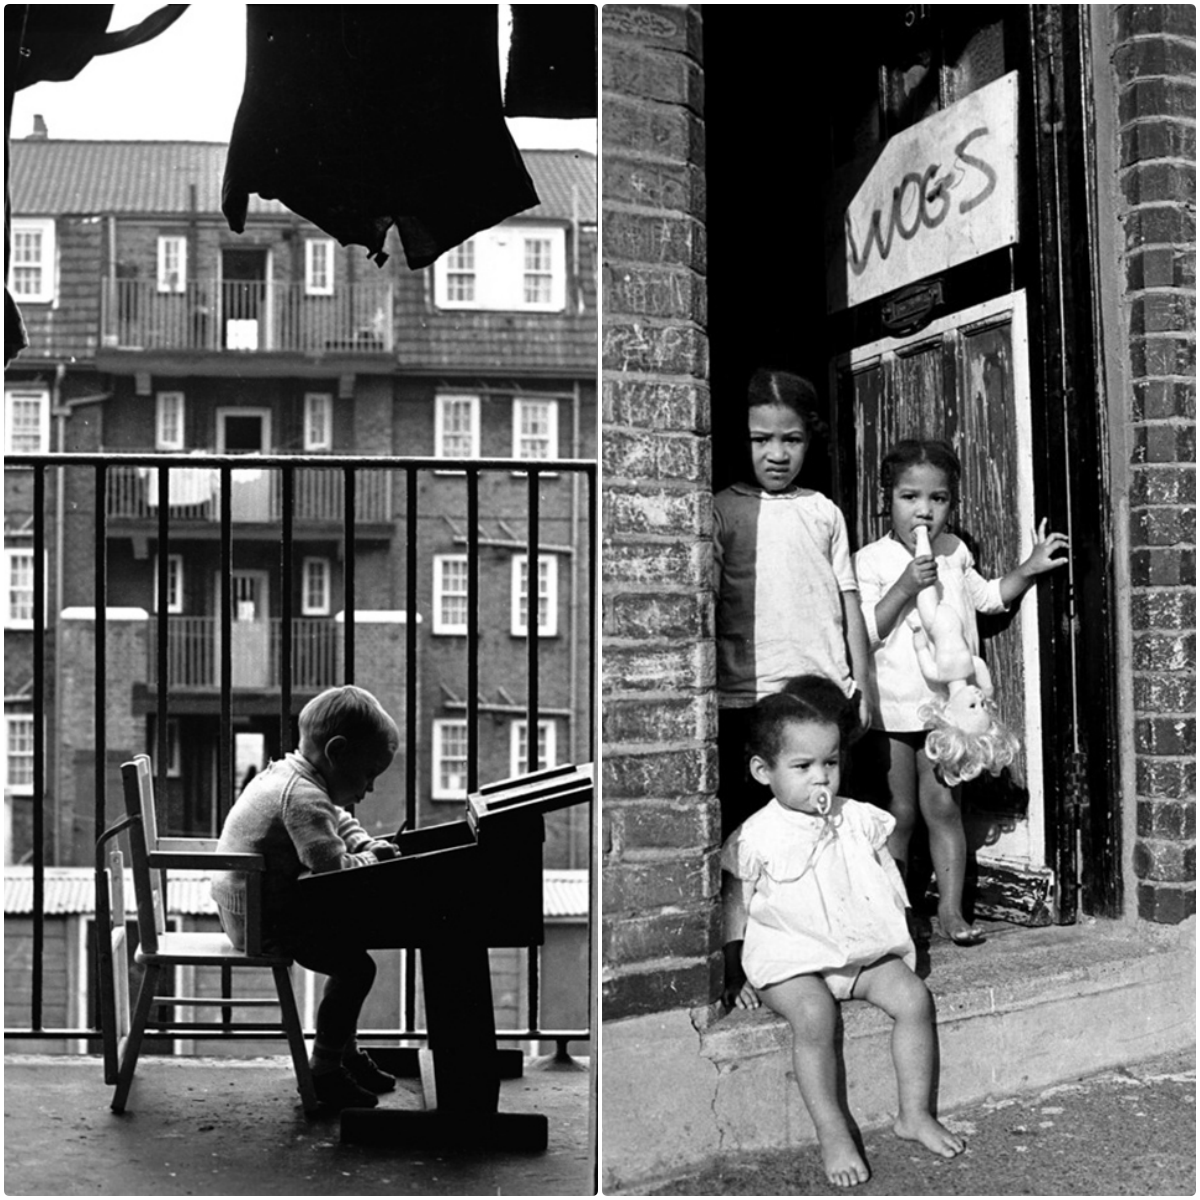 15 Black and White Photographs Capture the Gritty Reality of Life in East London During the Swinging Sixties